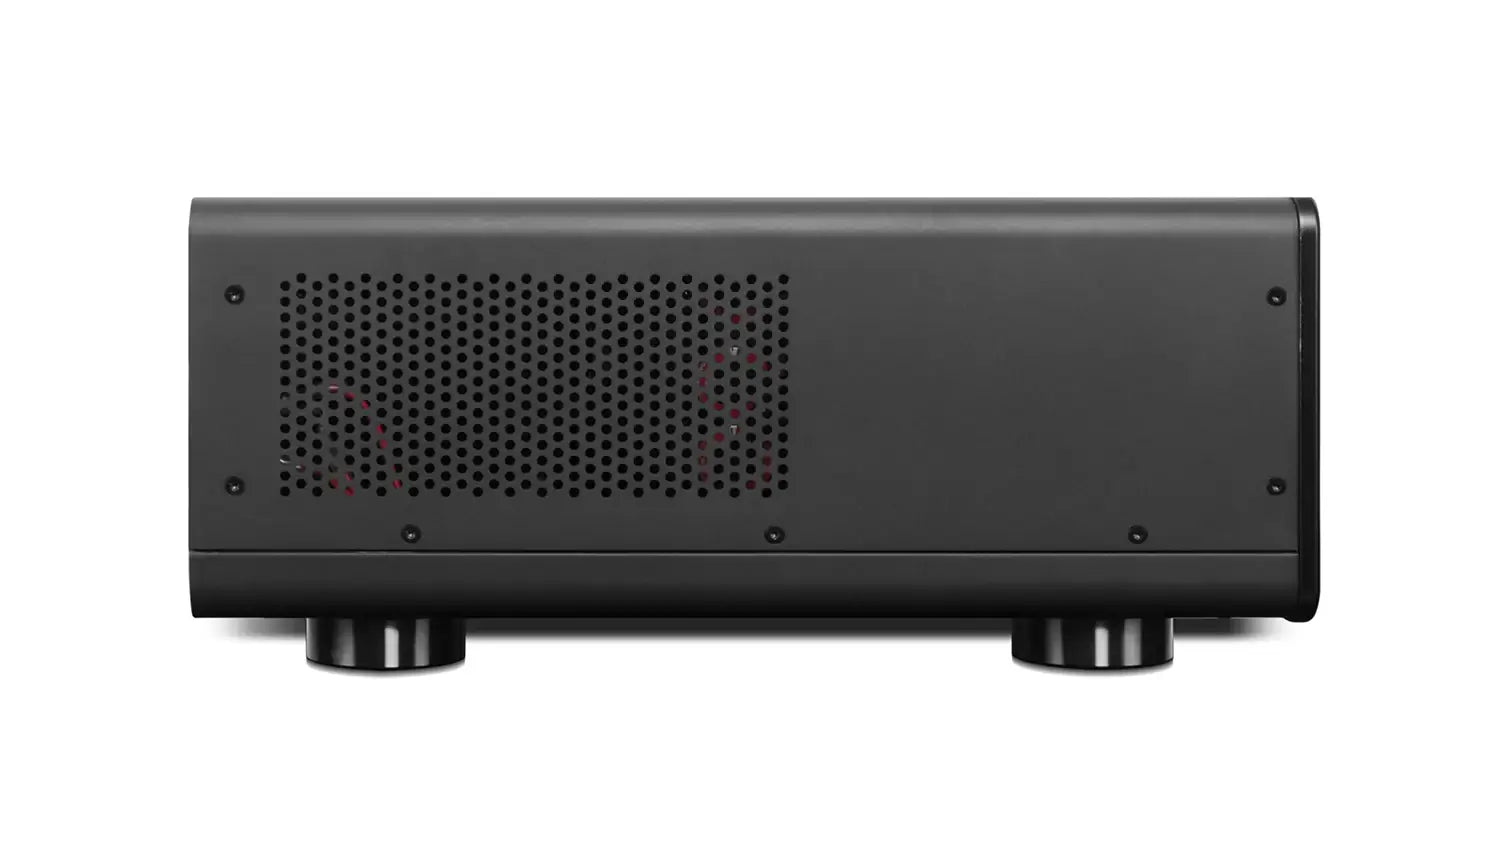 Aperionaudio-Energy-3-Channel-Home-Theater-Power-Amplifier-E3-Side